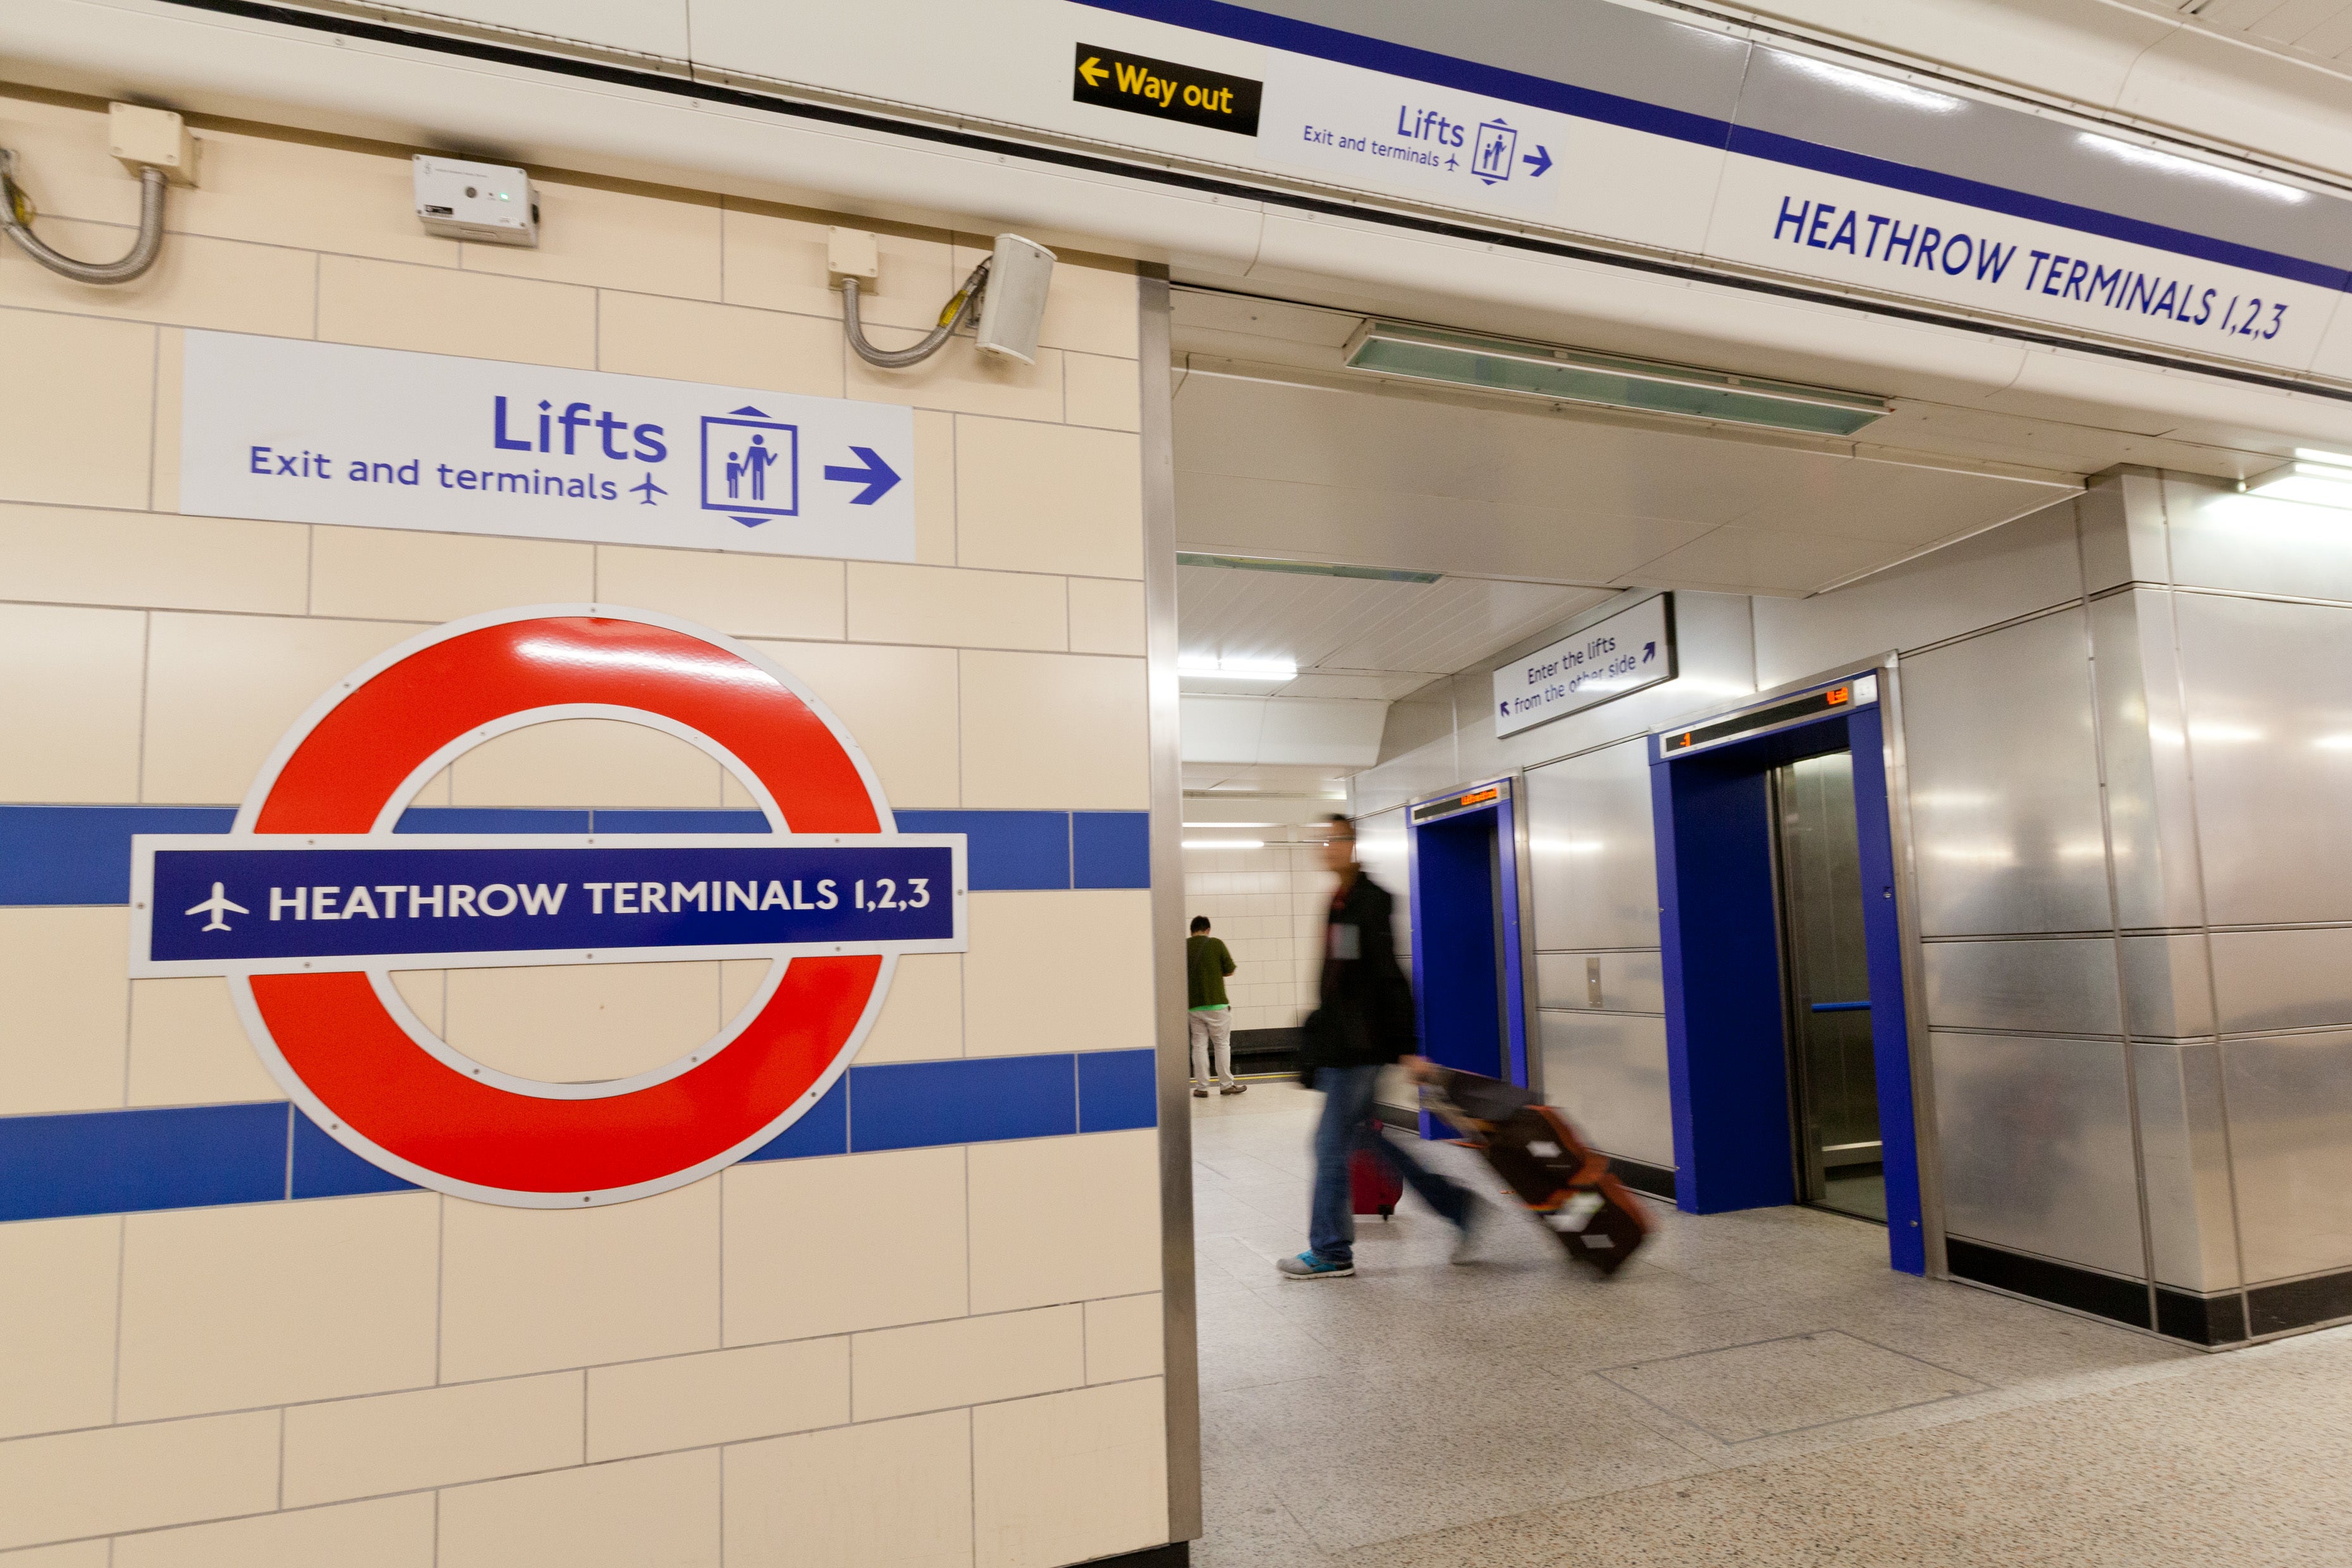 Piccadilly line passengers travelling between Heathrow and Zone 1 will pay 57 per cent more for their journeys